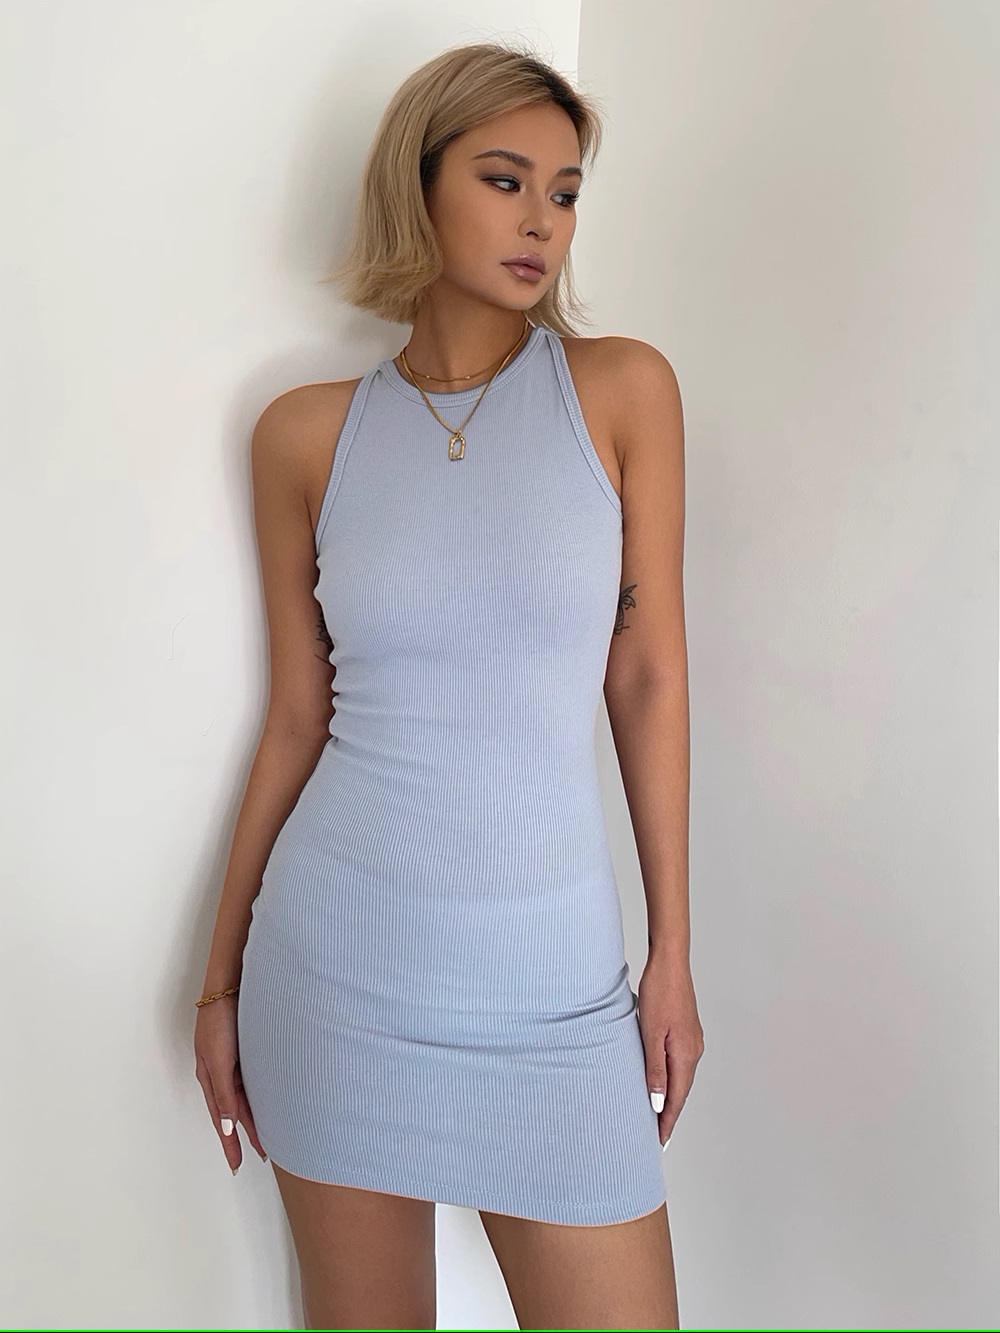 Sexy Backless Halter Party Dress Short Prom Dress Bodycon Dress